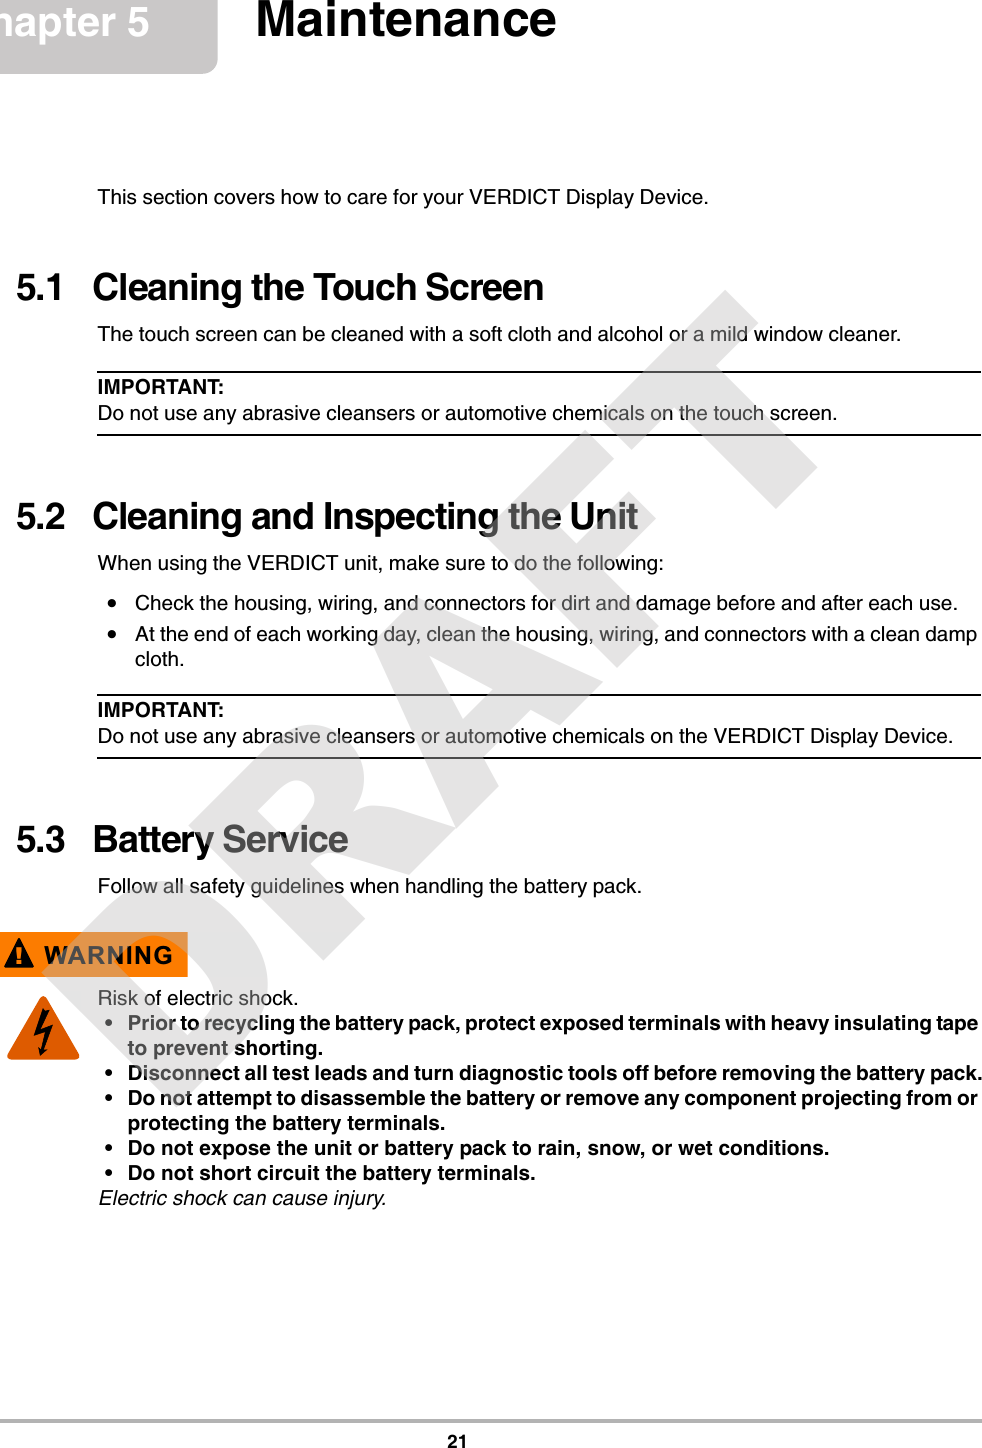 21Chapter 5 MaintenanceThis section covers how to care for your VERDICT Display Device.5.1   Cleaning the Touch ScreenThe touch screen can be cleaned with a soft cloth and alcohol or a mild window cleaner.IMPORTANT:Do not use any abrasive cleansers or automotive chemicals on the touch screen.5.2   Cleaning and Inspecting the UnitWhen using the VERDICT unit, make sure to do the following:•Check the housing, wiring, and connectors for dirt and damage before and after each use.•At the end of each working day, clean the housing, wiring, and connectors with a clean damp cloth.IMPORTANT:Do not use any abrasive cleansers or automotive chemicals on the VERDICT Display Device.5.3   Battery ServiceFollow all safety guidelines when handling the battery pack.!WARNINGRisk of electric shock.• Prior to recycling the battery pack, protect exposed terminals with heavy insulating tape to prevent shorting.• Disconnect all test leads and turn diagnostic tools off before removing the battery pack.• Do not attempt to disassemble the battery or remove any component projecting from or protecting the battery terminals.• Do not expose the unit or battery pack to rain, snow, or wet conditions.• Do not short circuit the battery terminals.Electric shock can cause injury.DRAFT